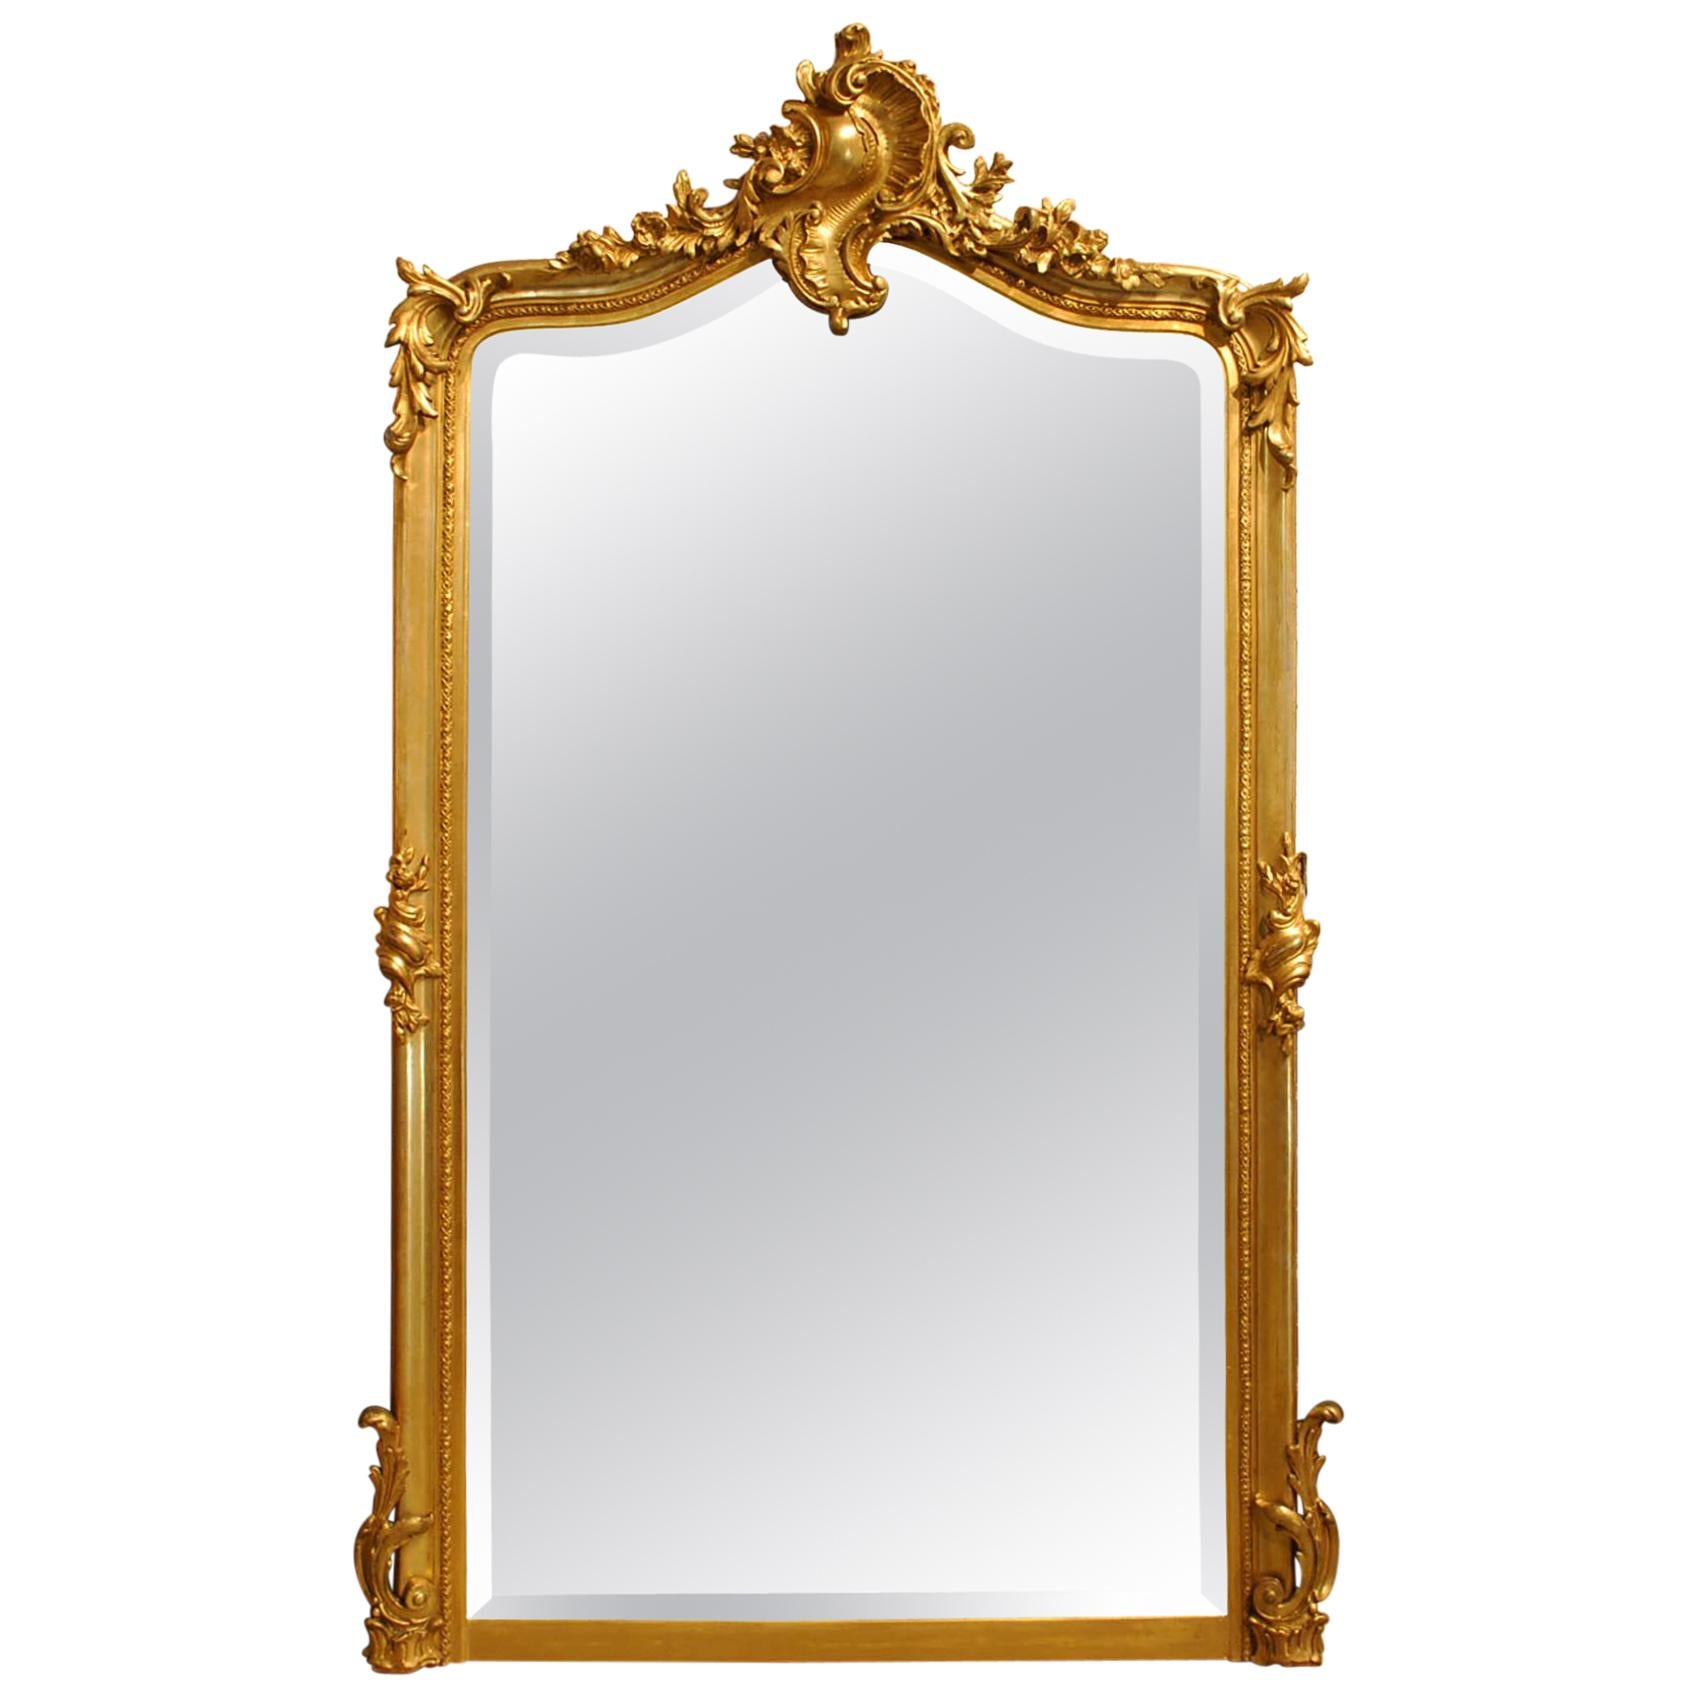 Antique French Louis Quinze or Rococo Gold Gilt Mirror with Facetted Glass